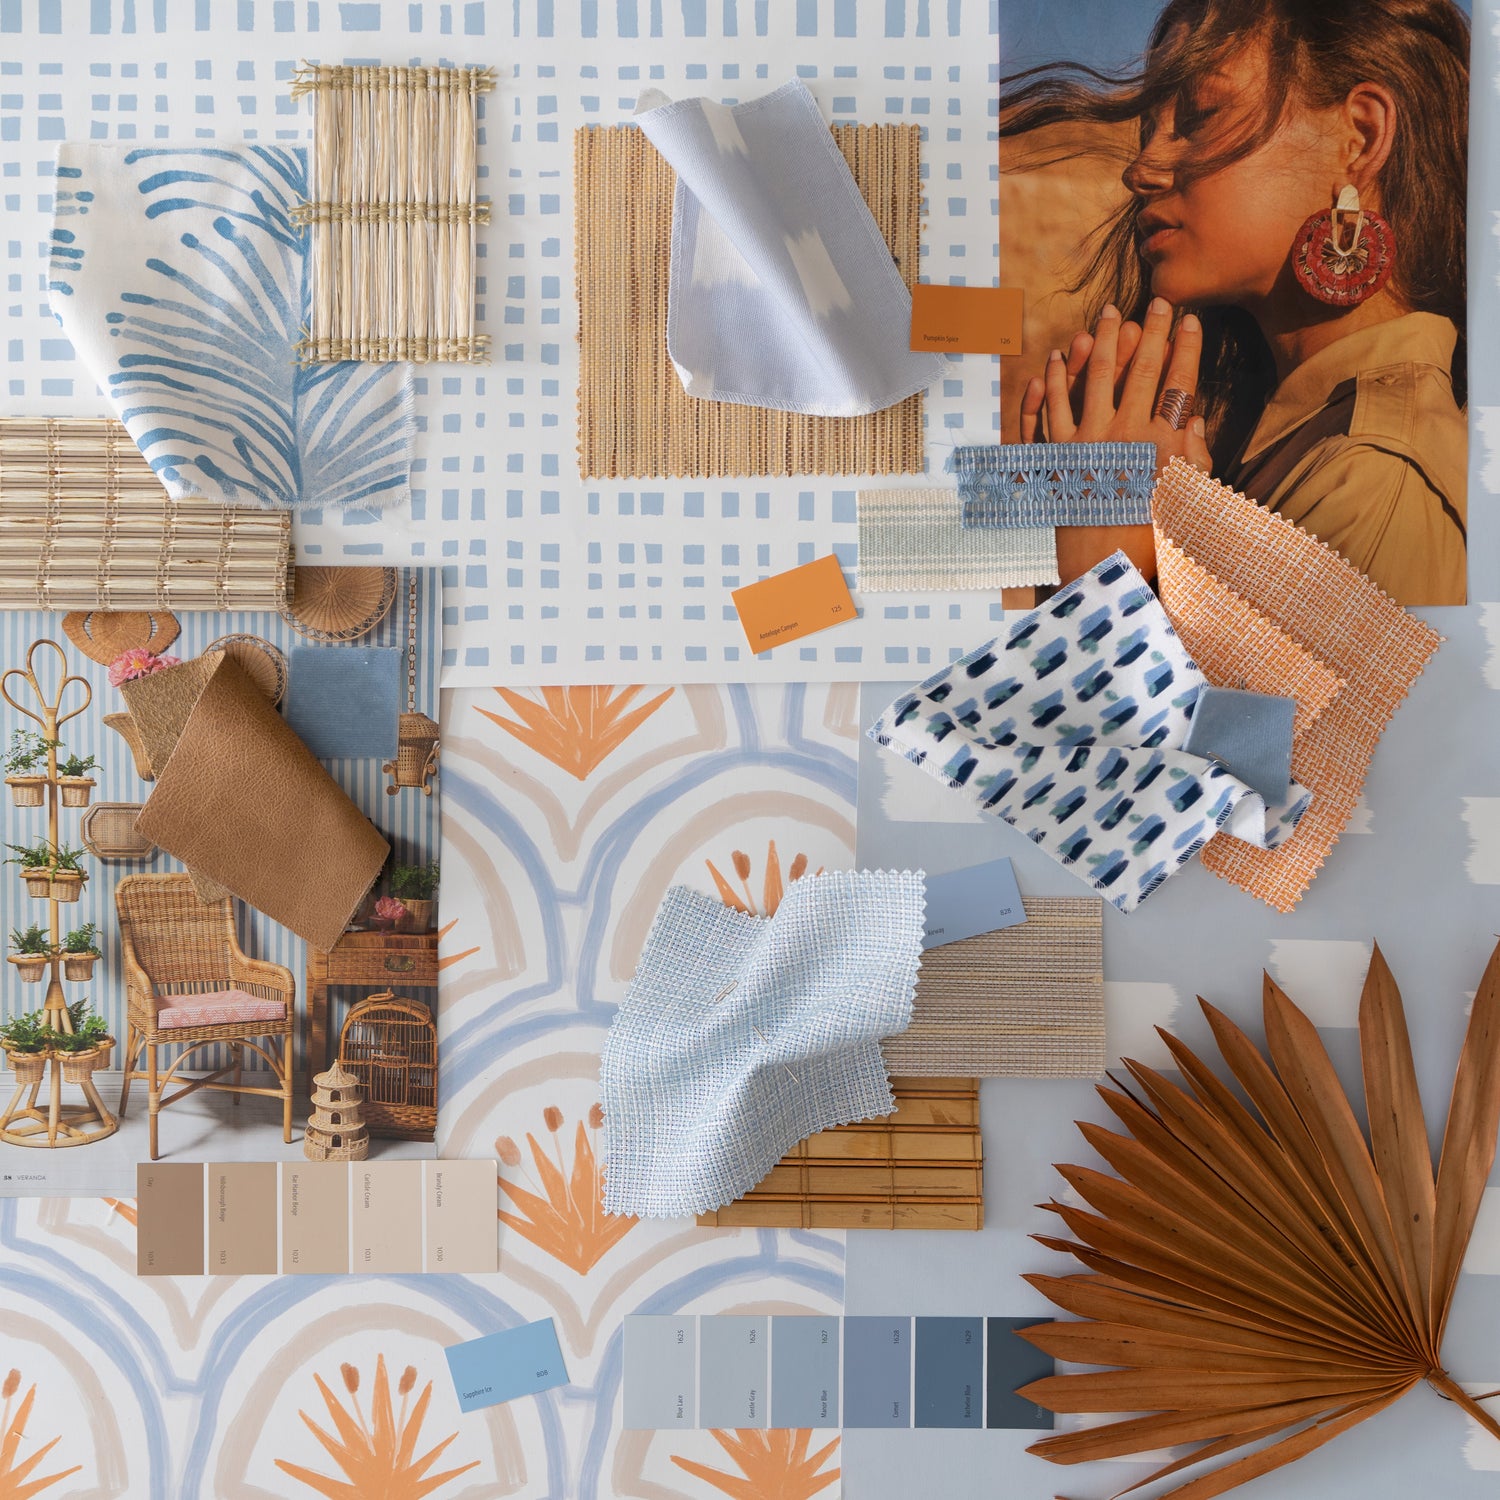 Interior design moodboard and fabric inspirations with Sky Blue Pattern Printed swatch, Navy and Blue Printed Swatch, sky blue printed swatch, Art Deco Palm Pattern Swatch, and orange touches throughout